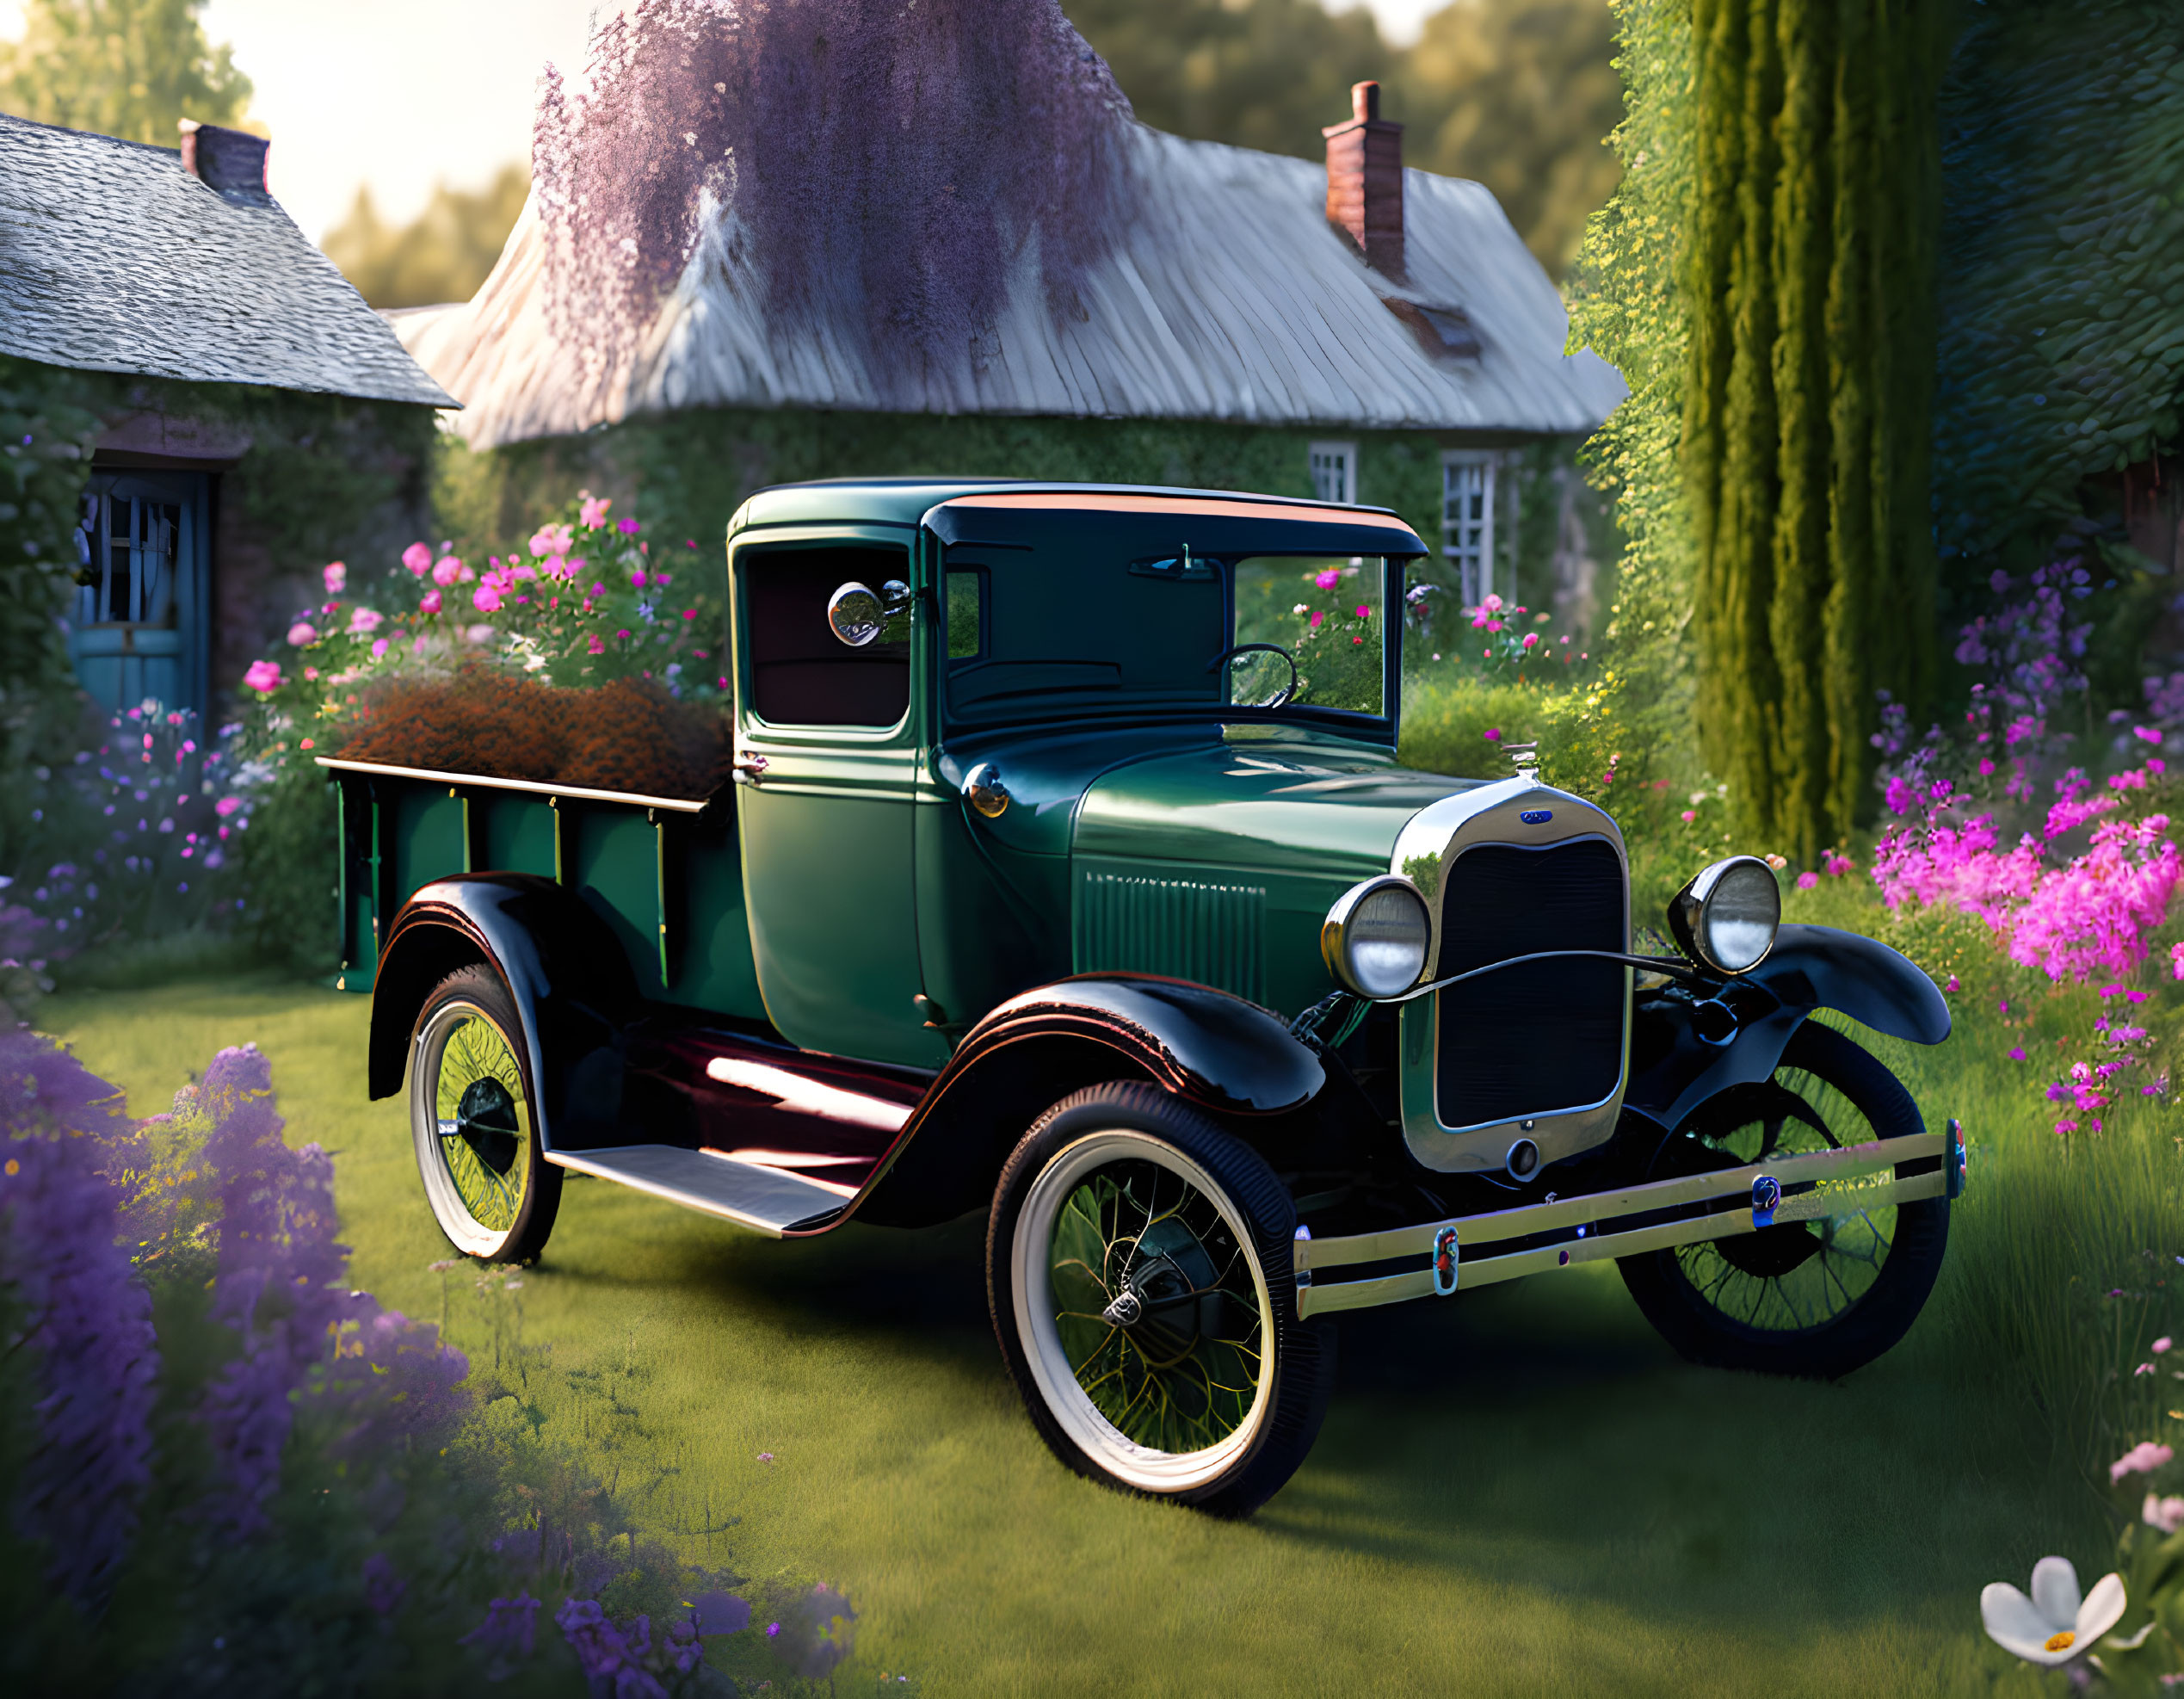 Vintage Green Pickup Truck Parked Near Cottage in Tranquil Countryside